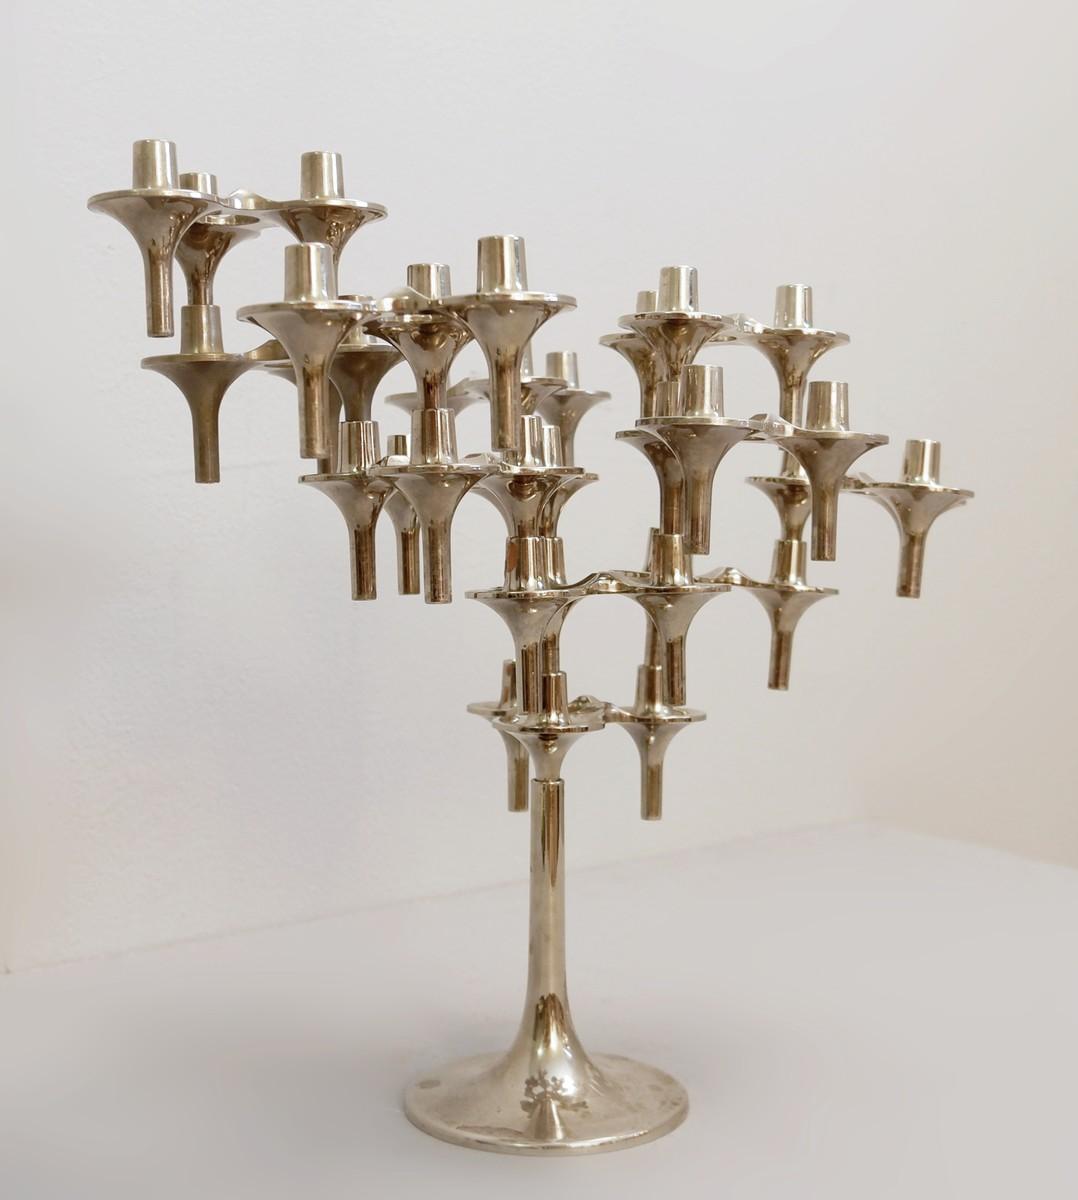 Fritz Nagel & Ceasar Stoffi set of 12 modular candleholders 'Orion' by BMF - 1960 Measurements are variable depending on the arrangement of the elements Measure 1 piece Ø 10 - h 6 cm Base + 3 pieces: l 16 - h 25 cm.